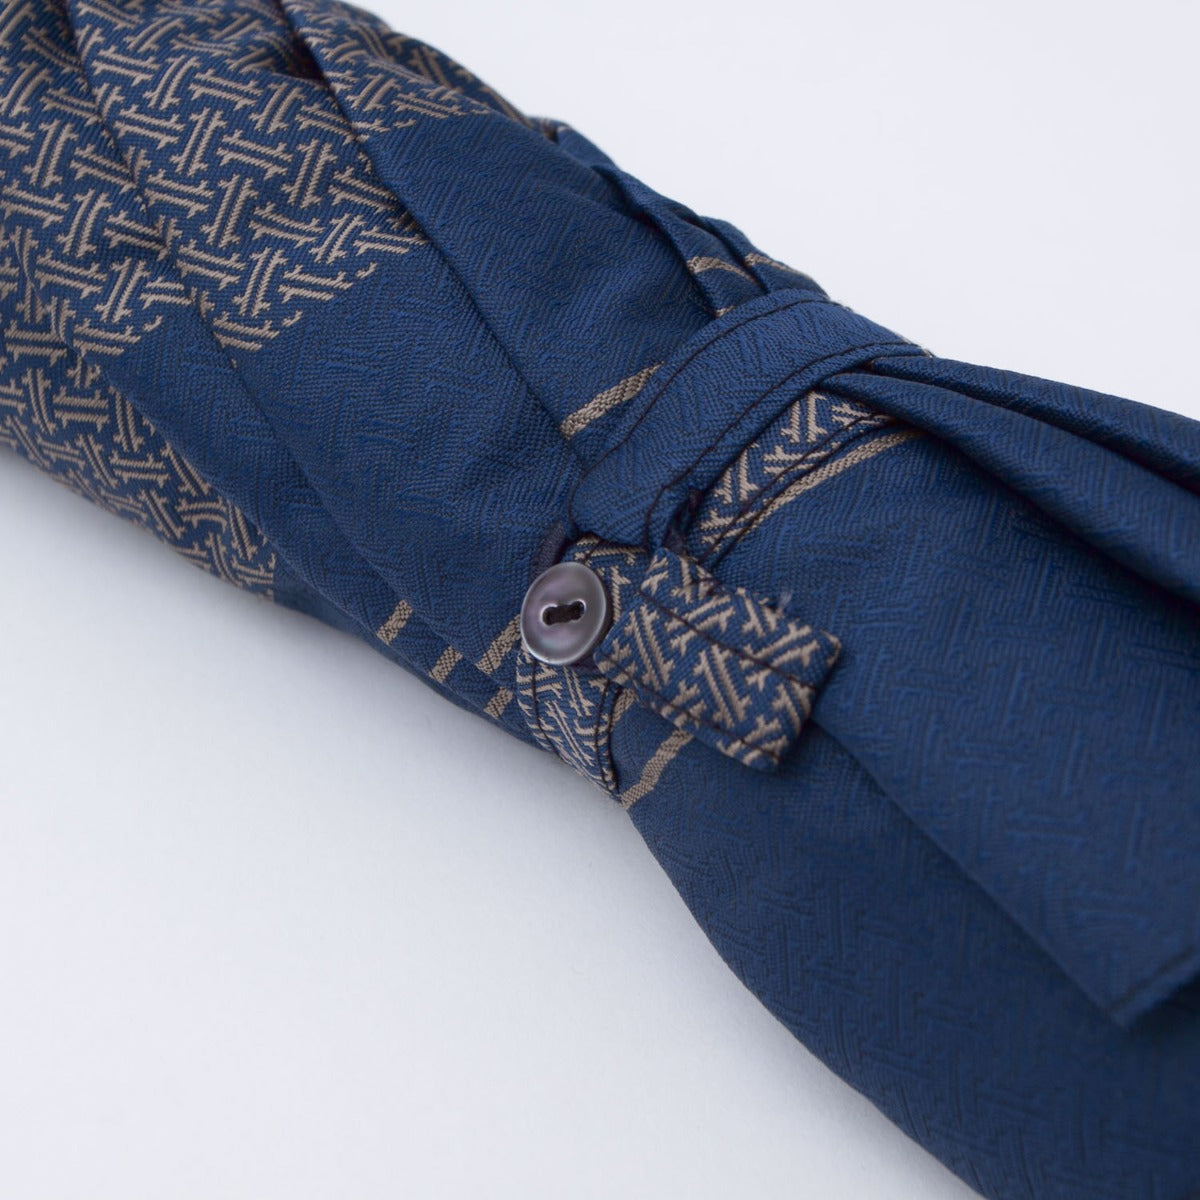 A Patterned Navy Travel Umbrella with Leather Handle by KirbyAllison.com on a white surface.